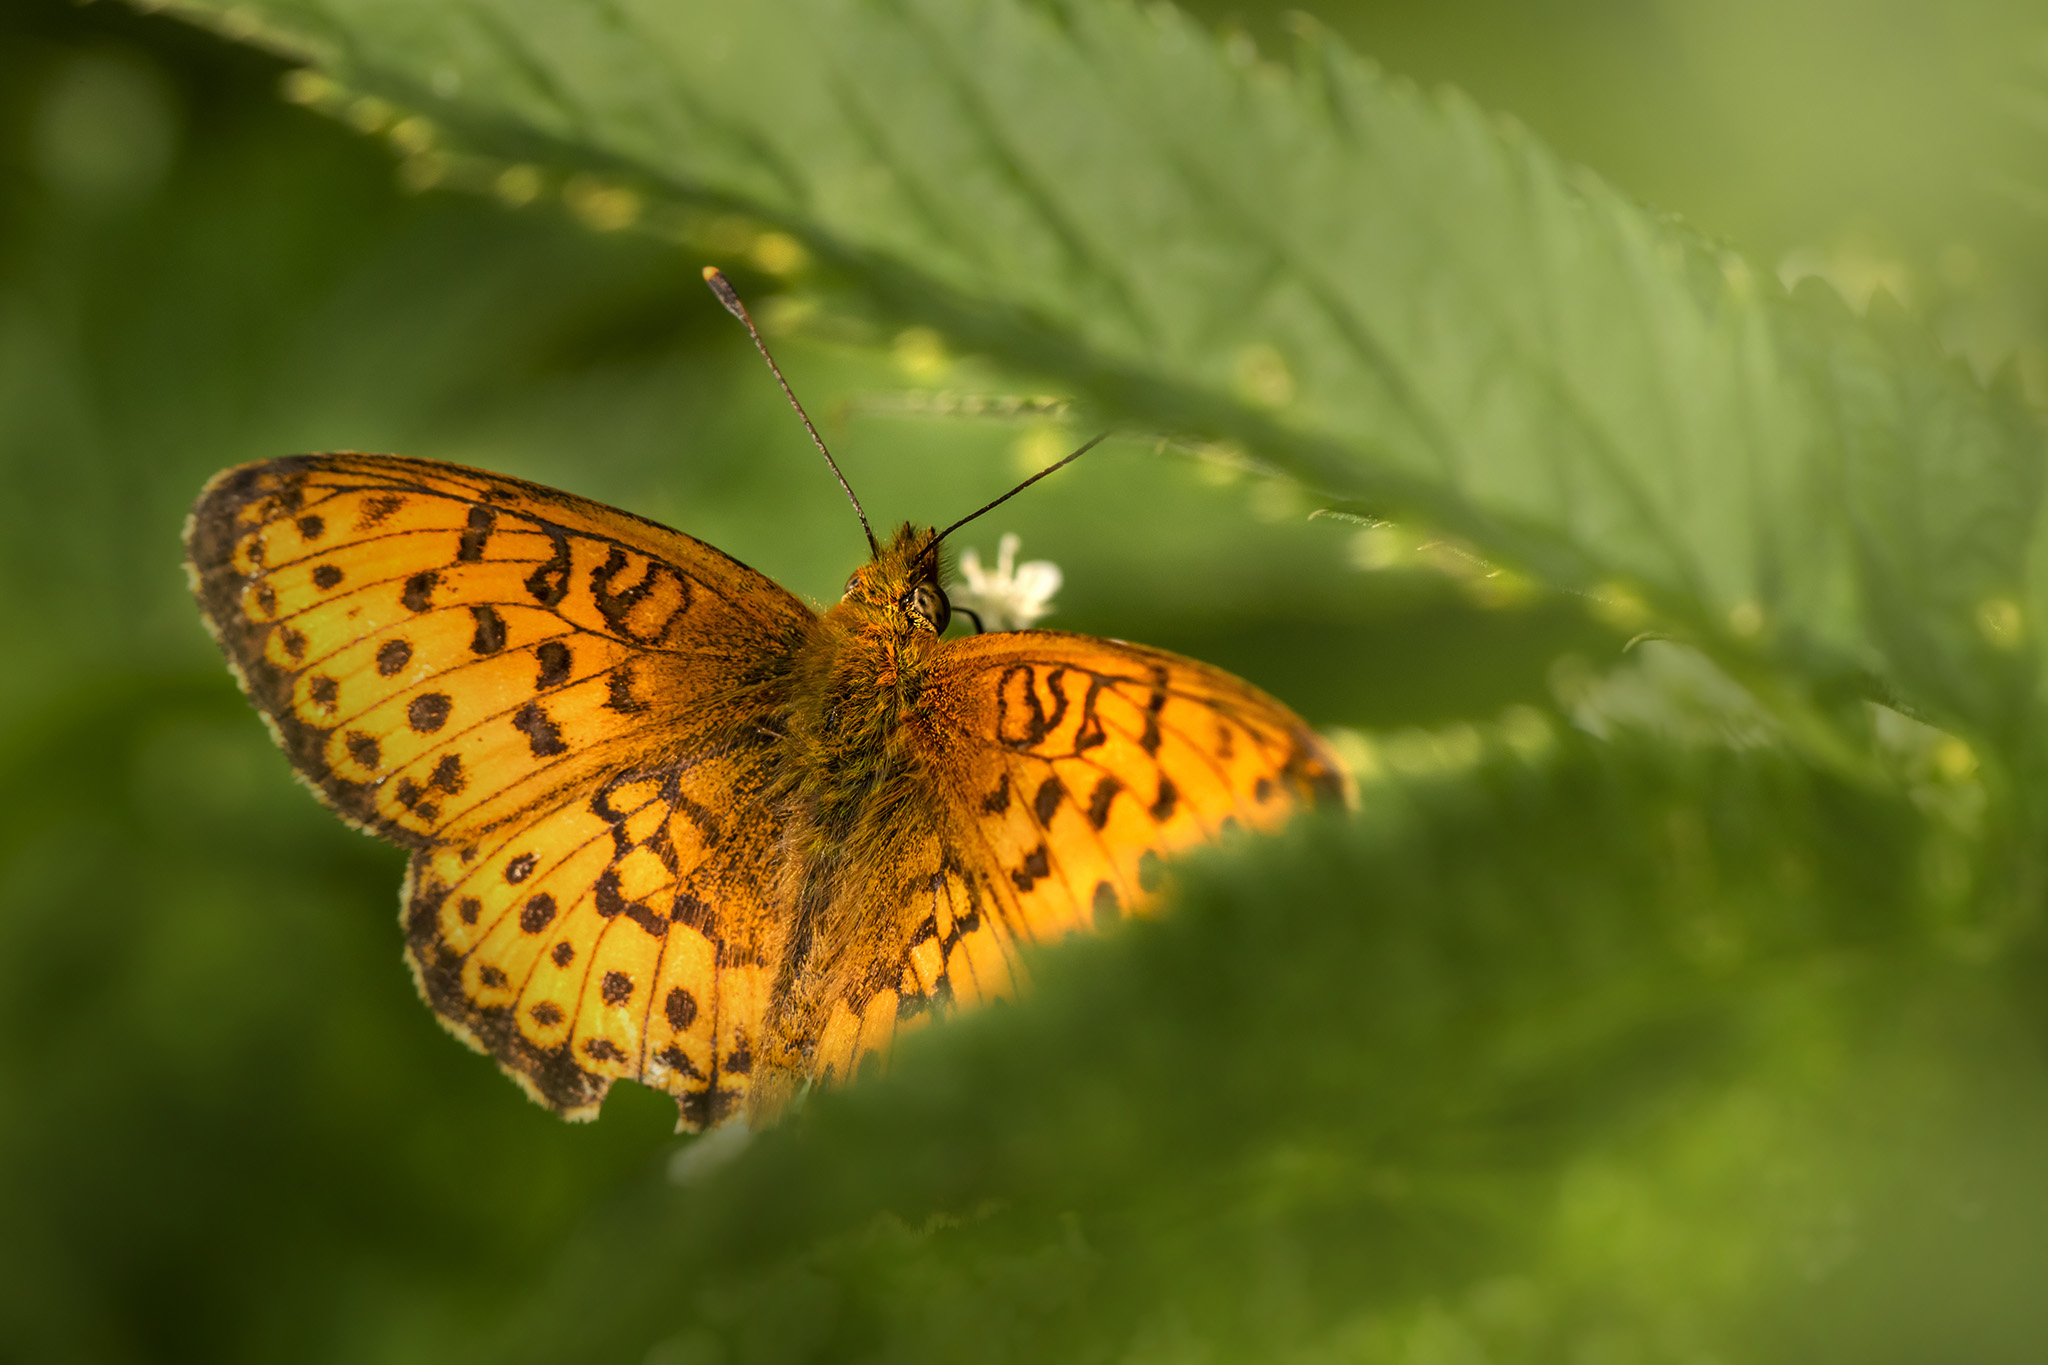 Lesser marbled fritillary (Brenthis ino)